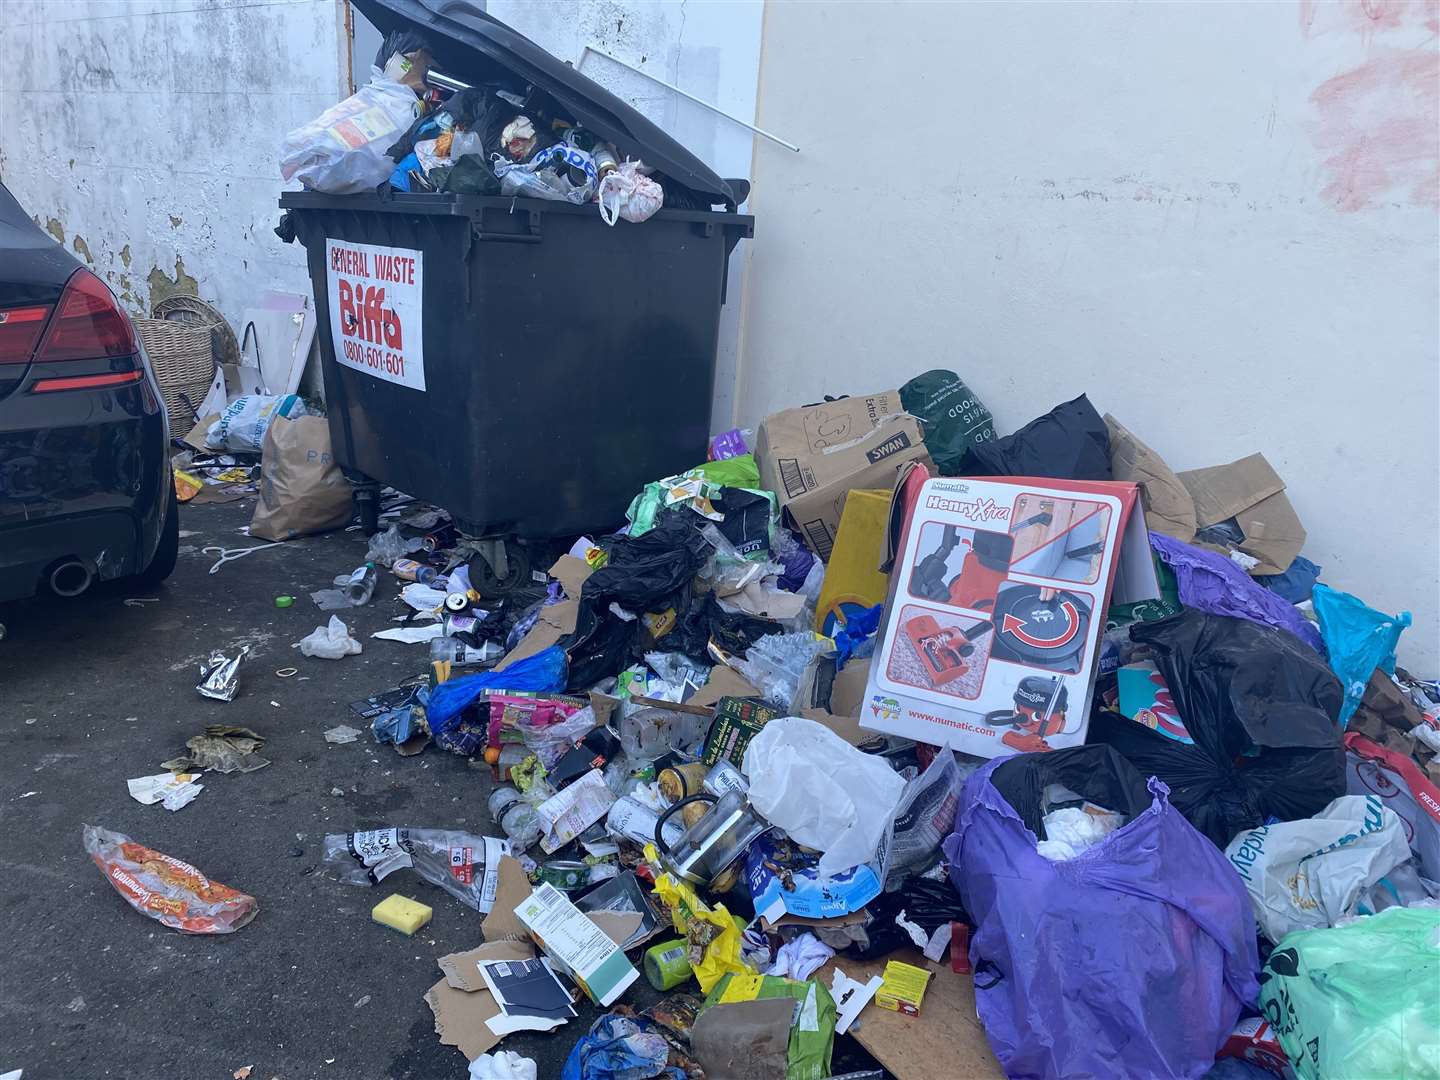 The rubbish appears to be a mix of household waste and fly-tipping